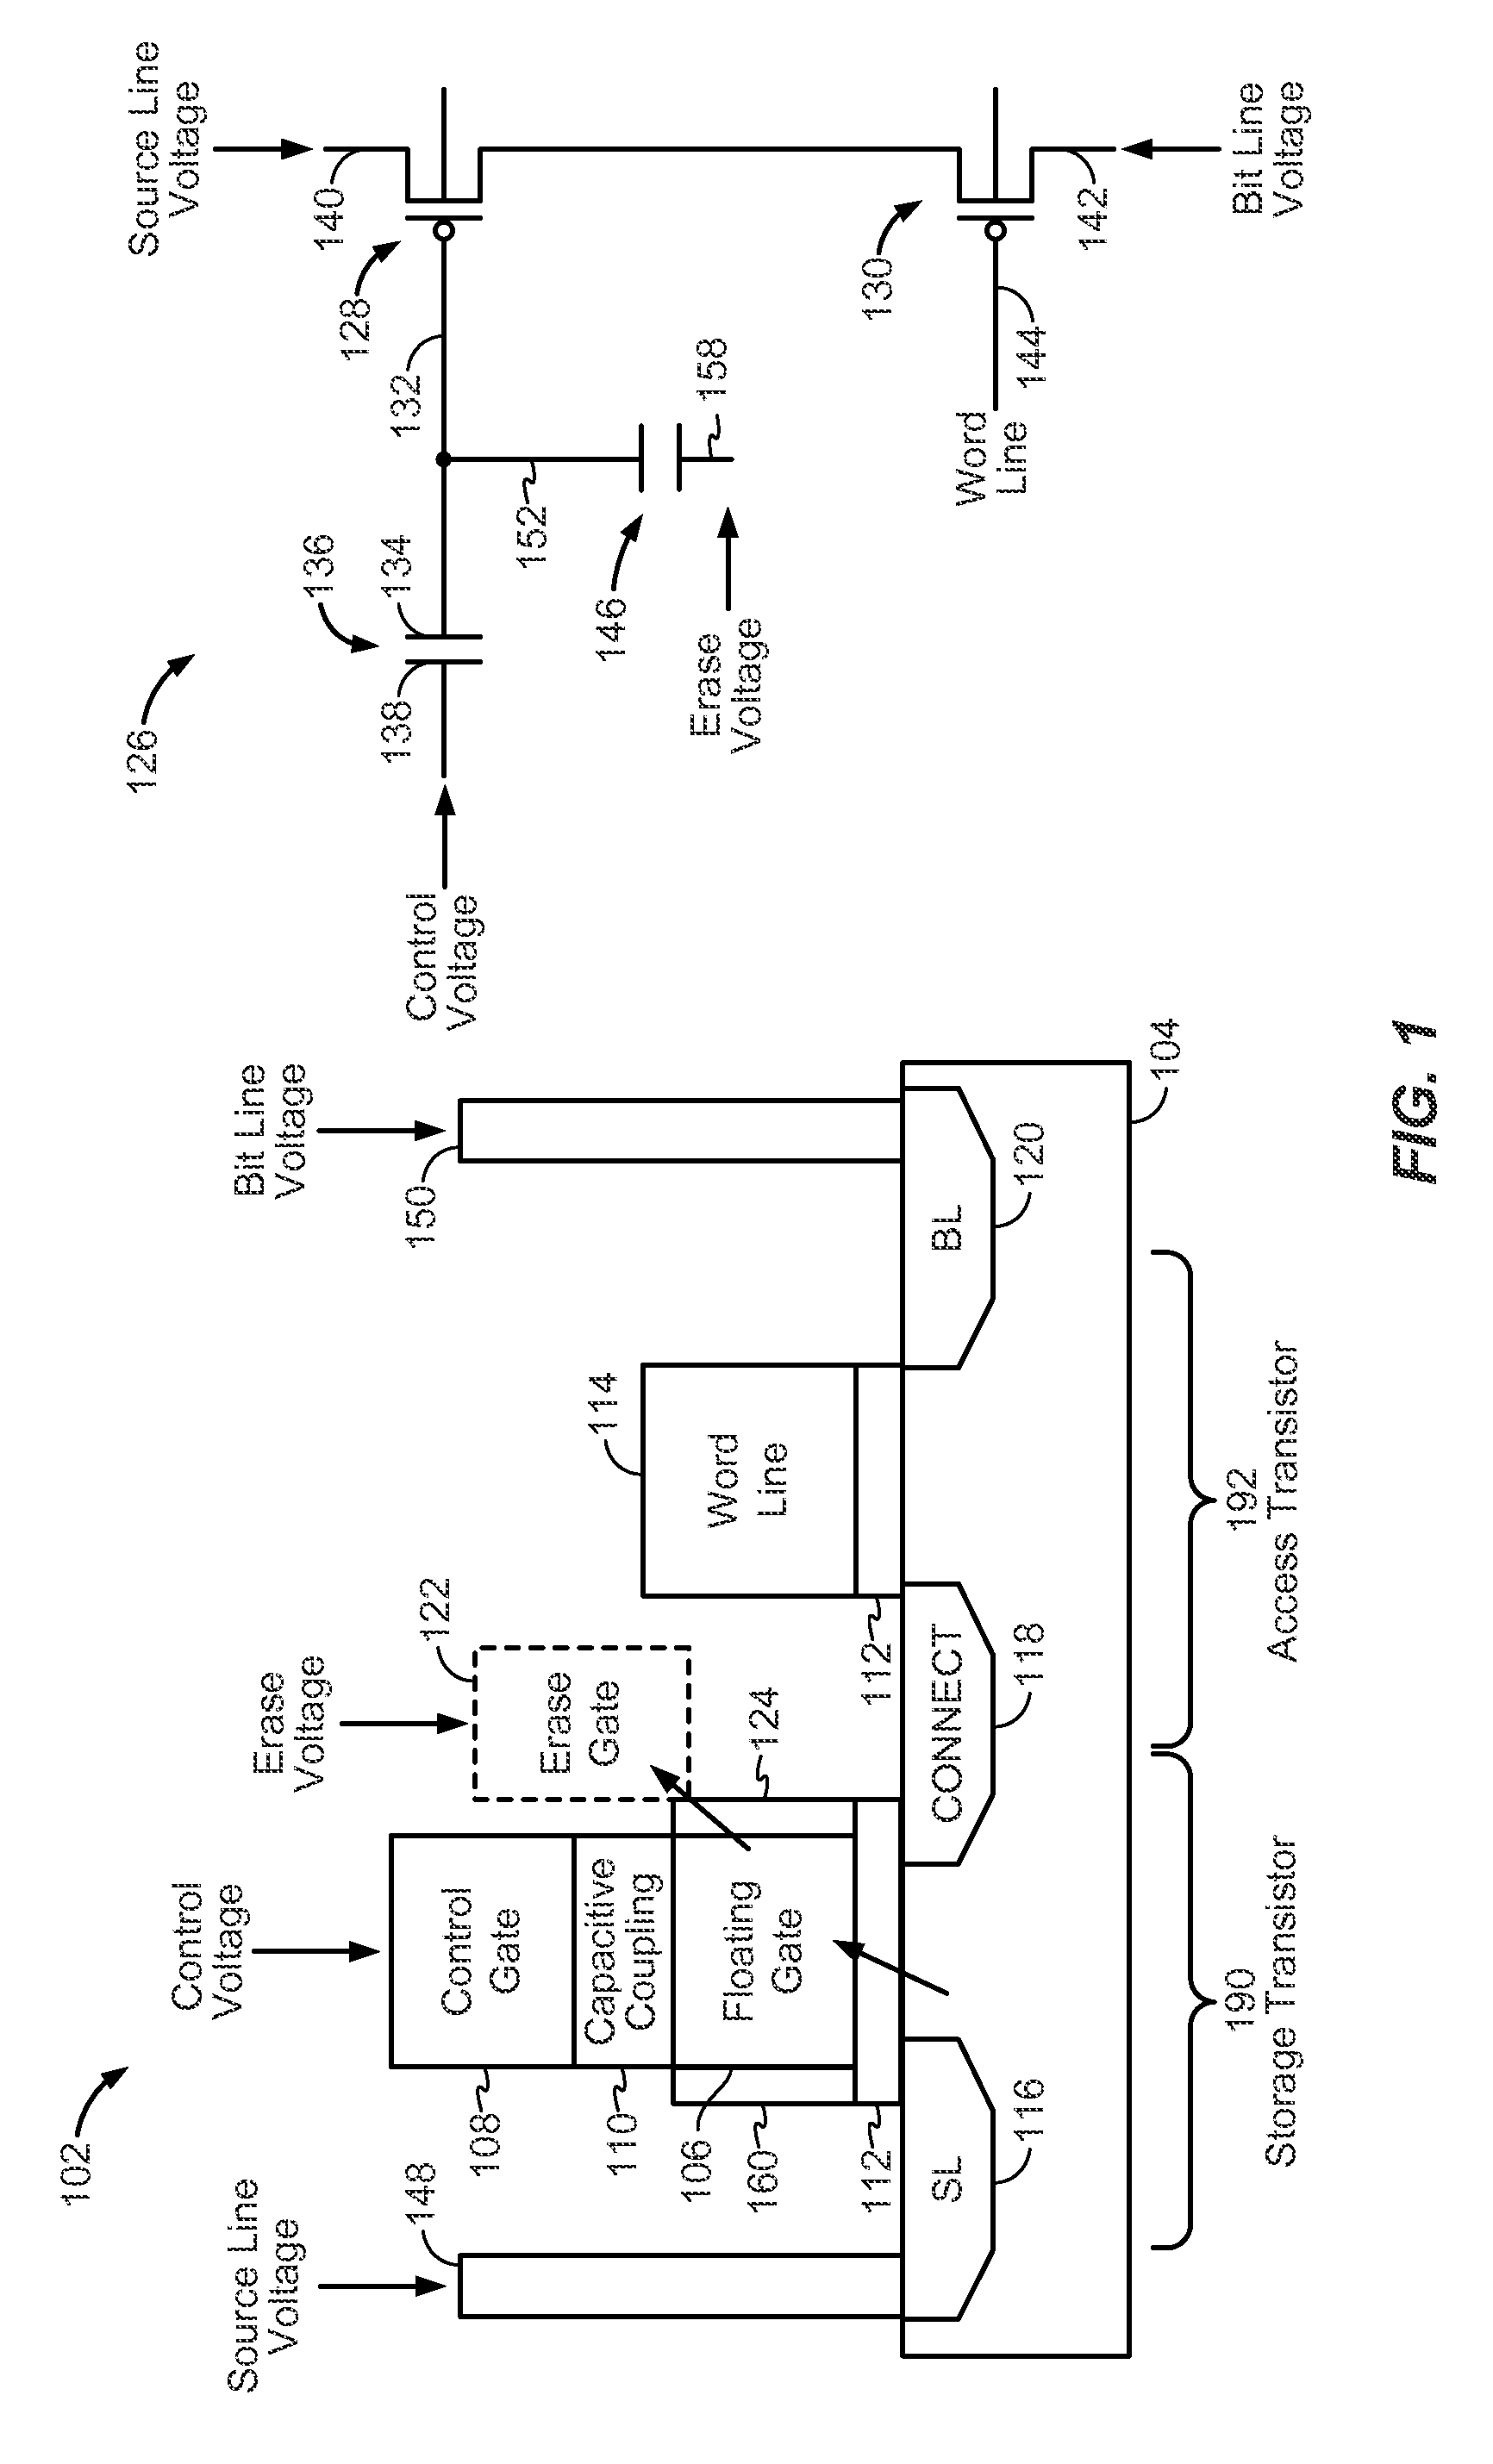 Flash memory cell with capacitive coupling between a metal floating gate and a metal control gate